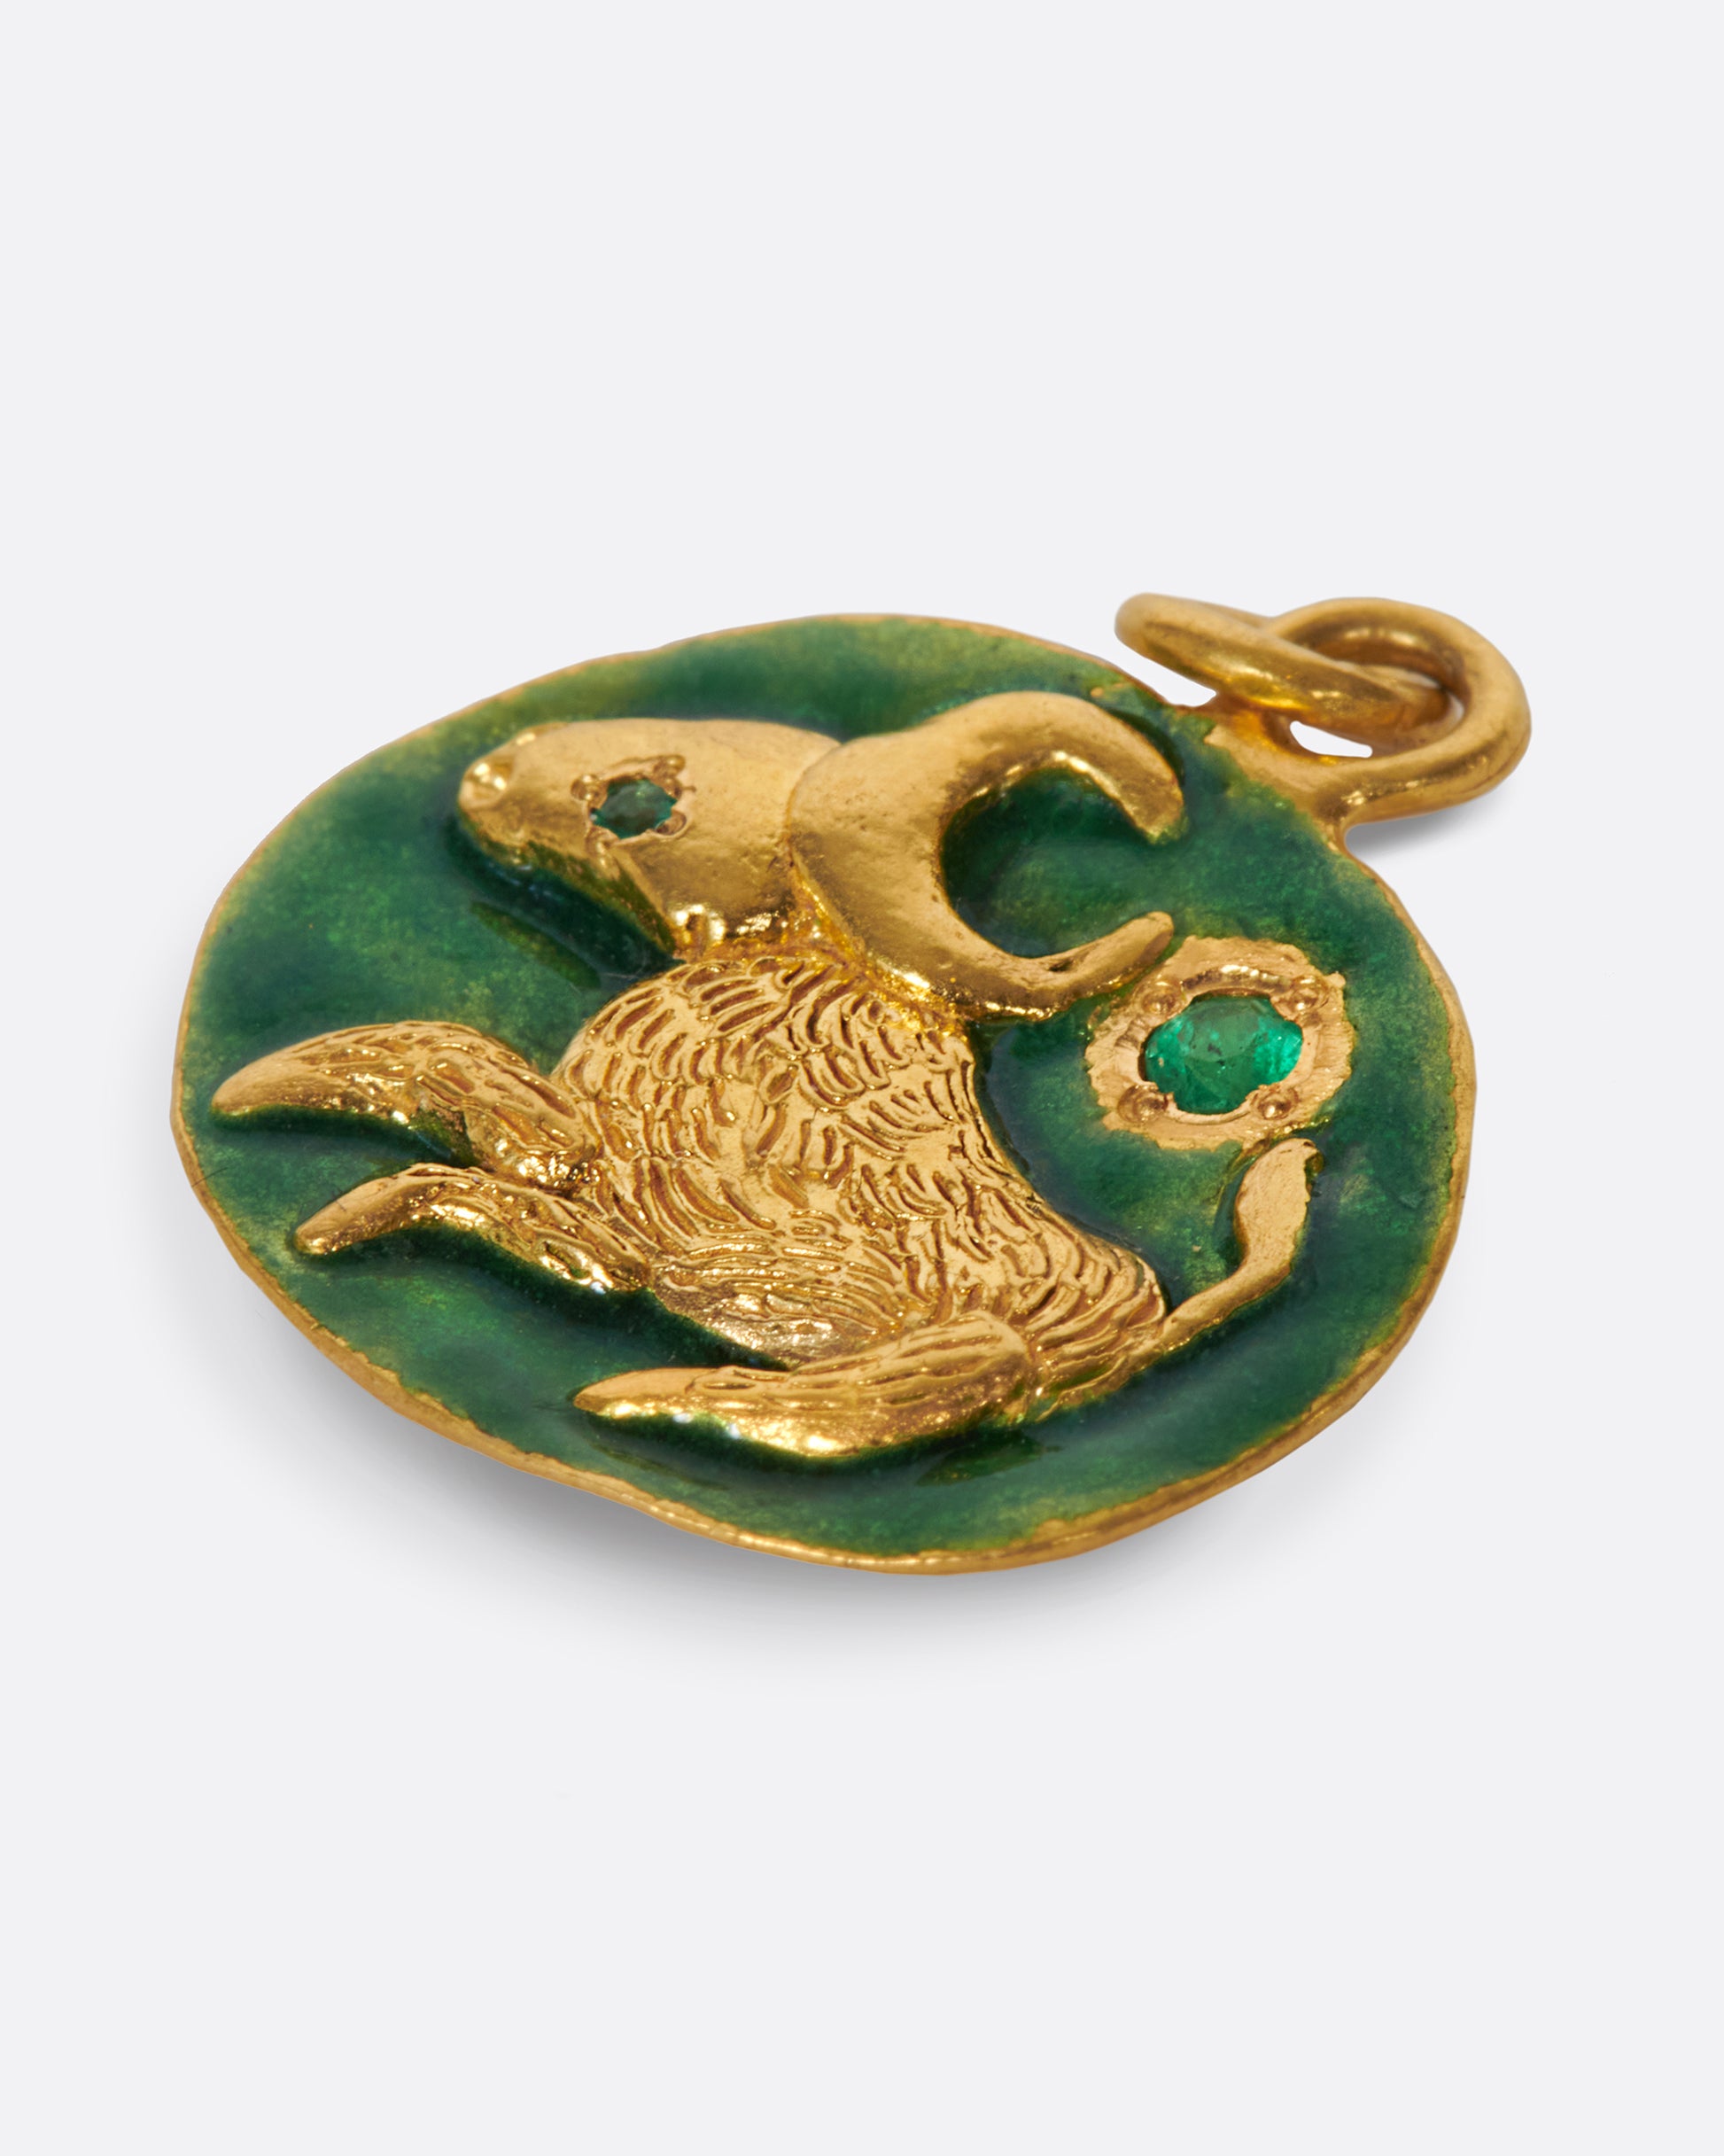 A slightly asymmetrical, circular pendant with a Taurus bull and emerald accents.